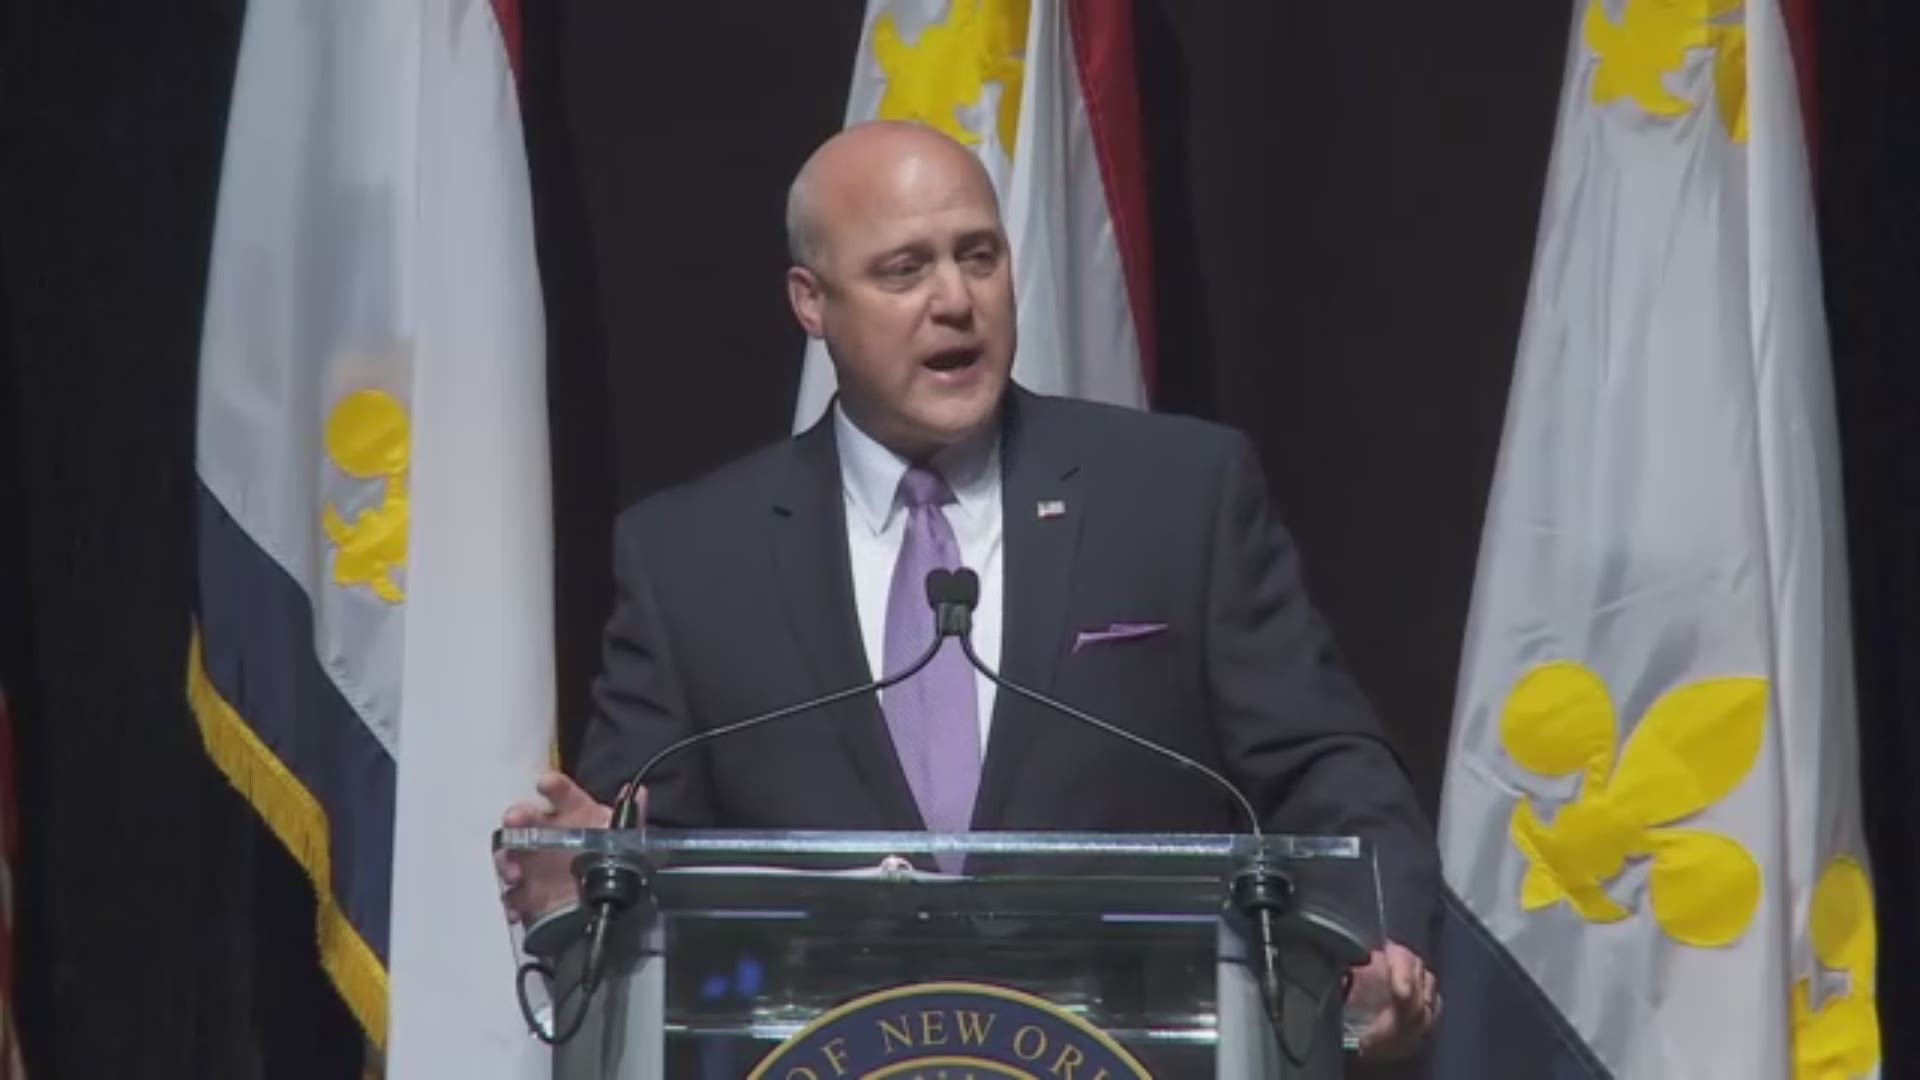 Mayor Mitch Landrieu talks about the murders in the city since the death of Will Smith.